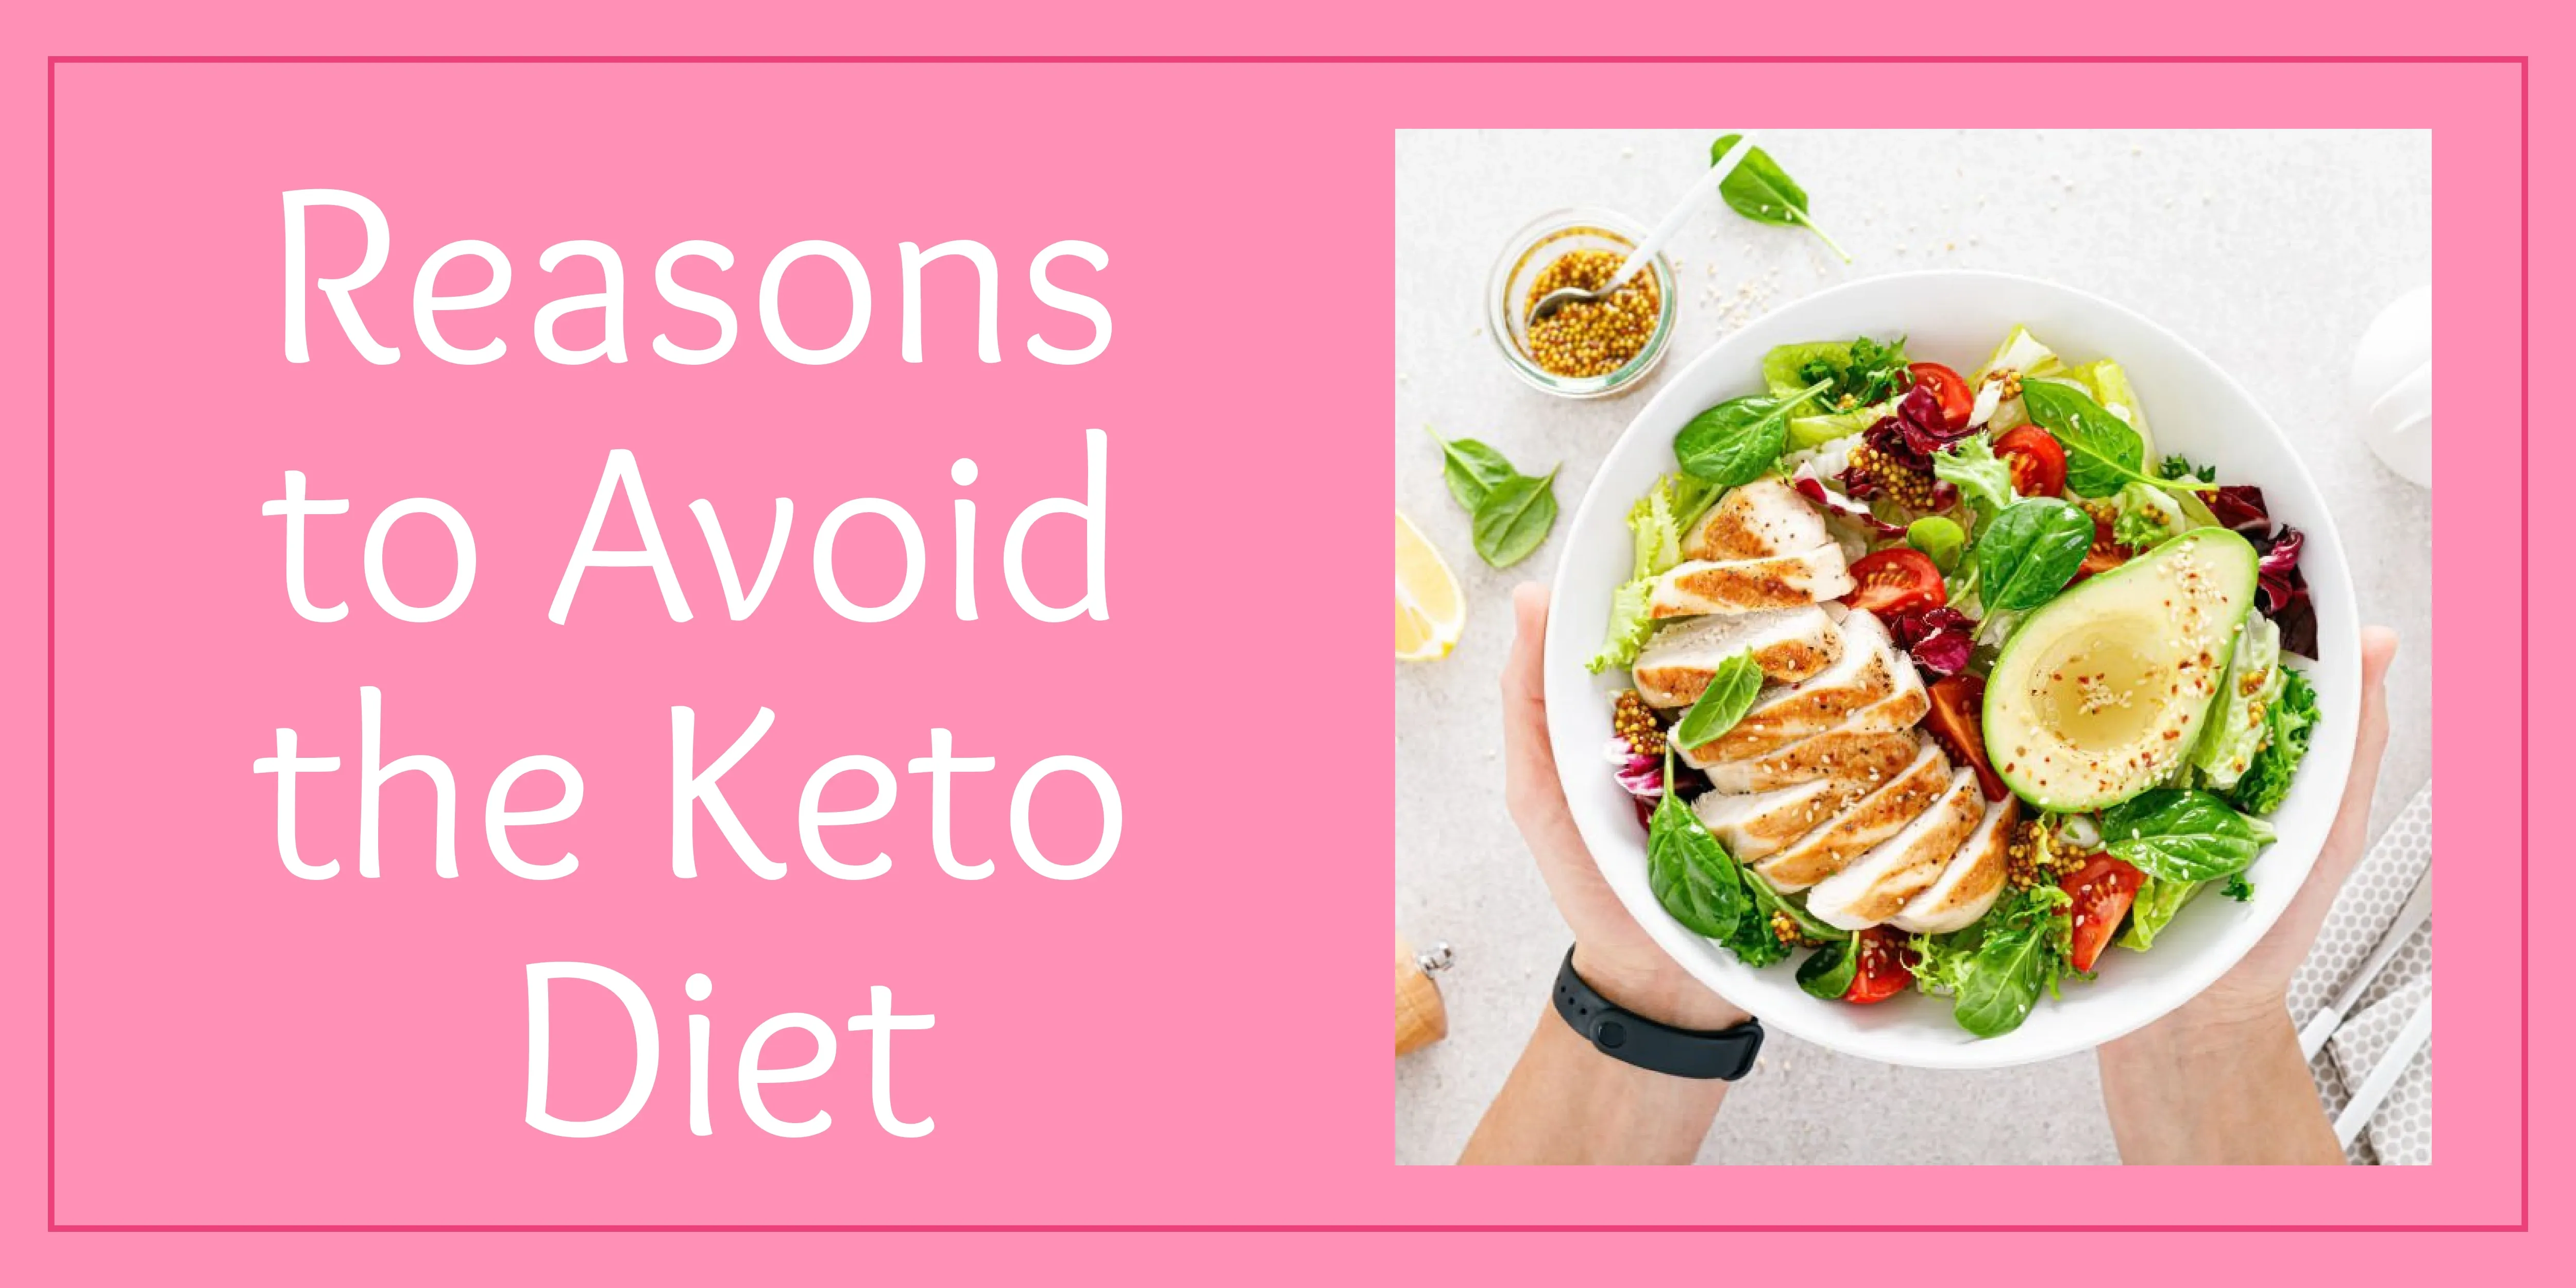 5 Experts Accepted Reasons to Avoid the Keto Diet